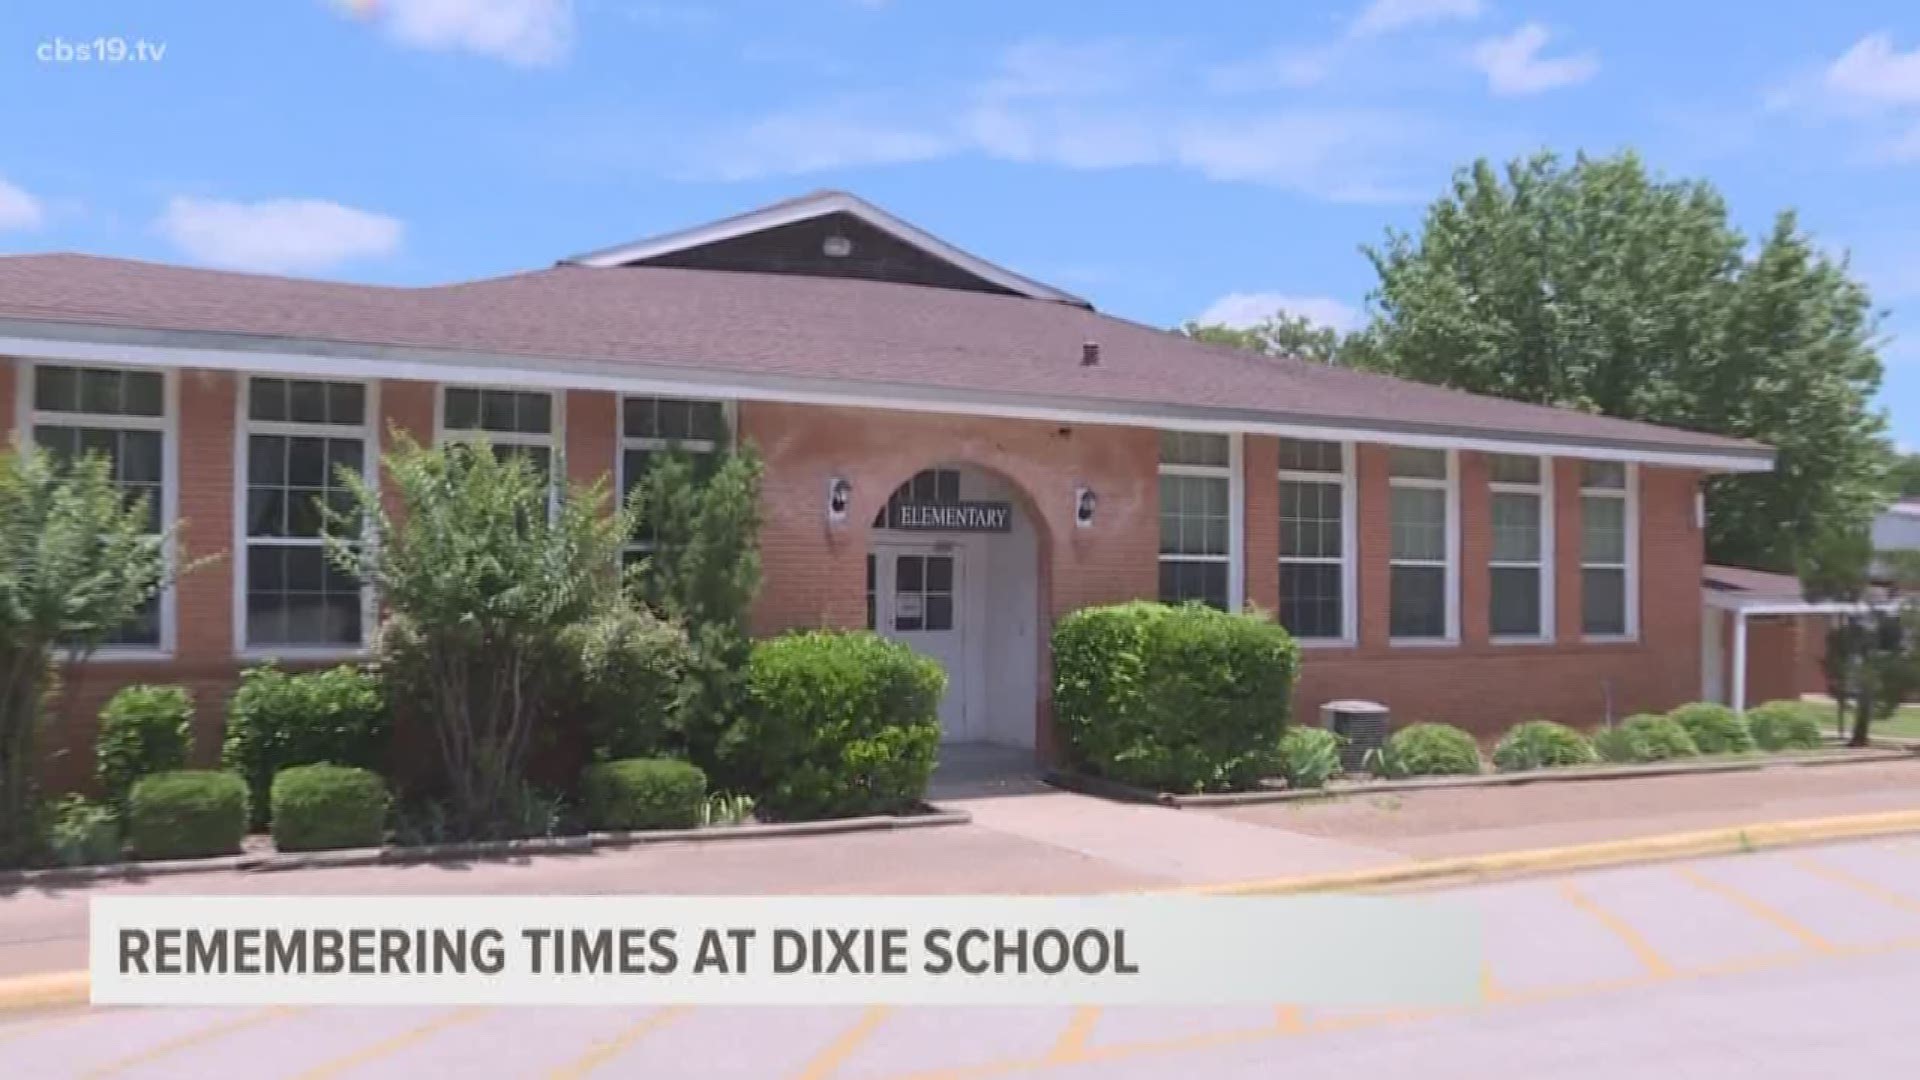 Hundreds from the classes of 1924-1978 gathered for a reunion for the old Dixie School and Dixie Elementary.